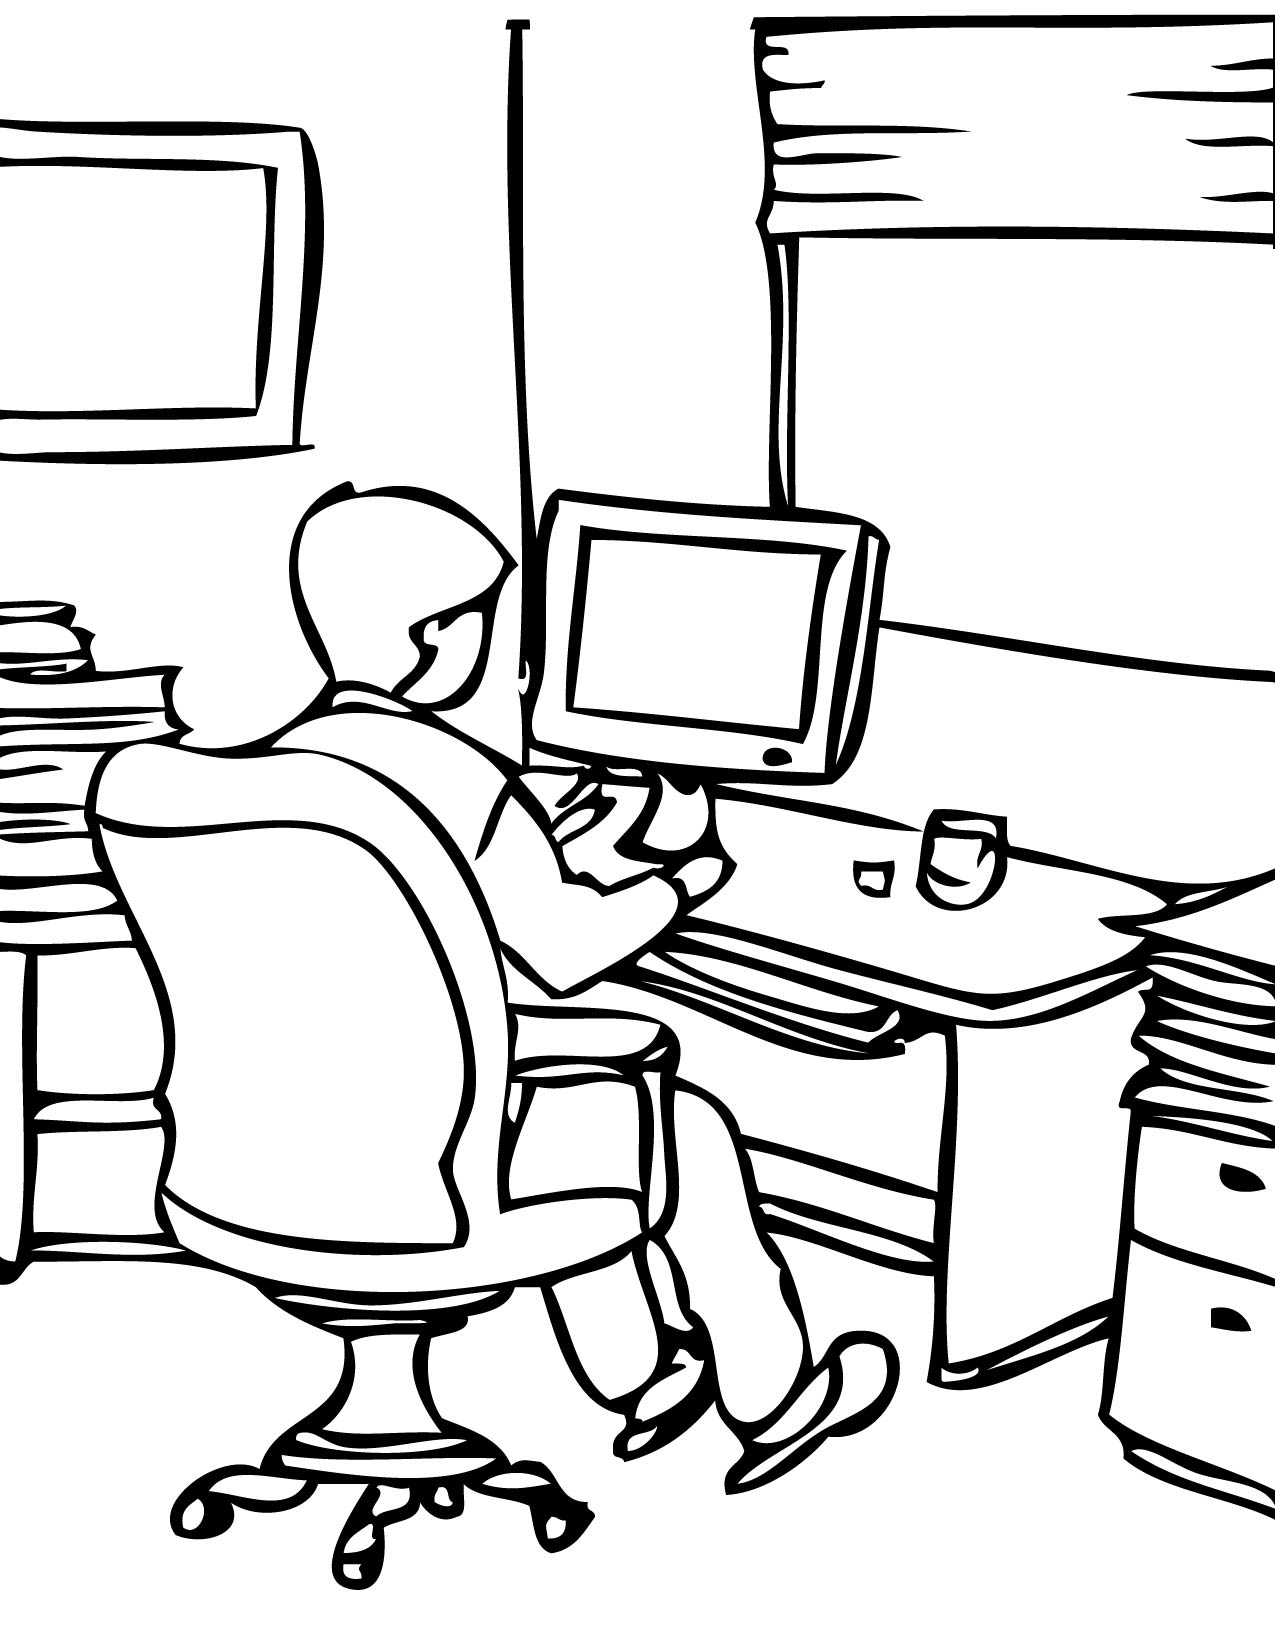 Download Office Coloring Pages at GetDrawings.com | Free for personal use Office Coloring Pages of your ...